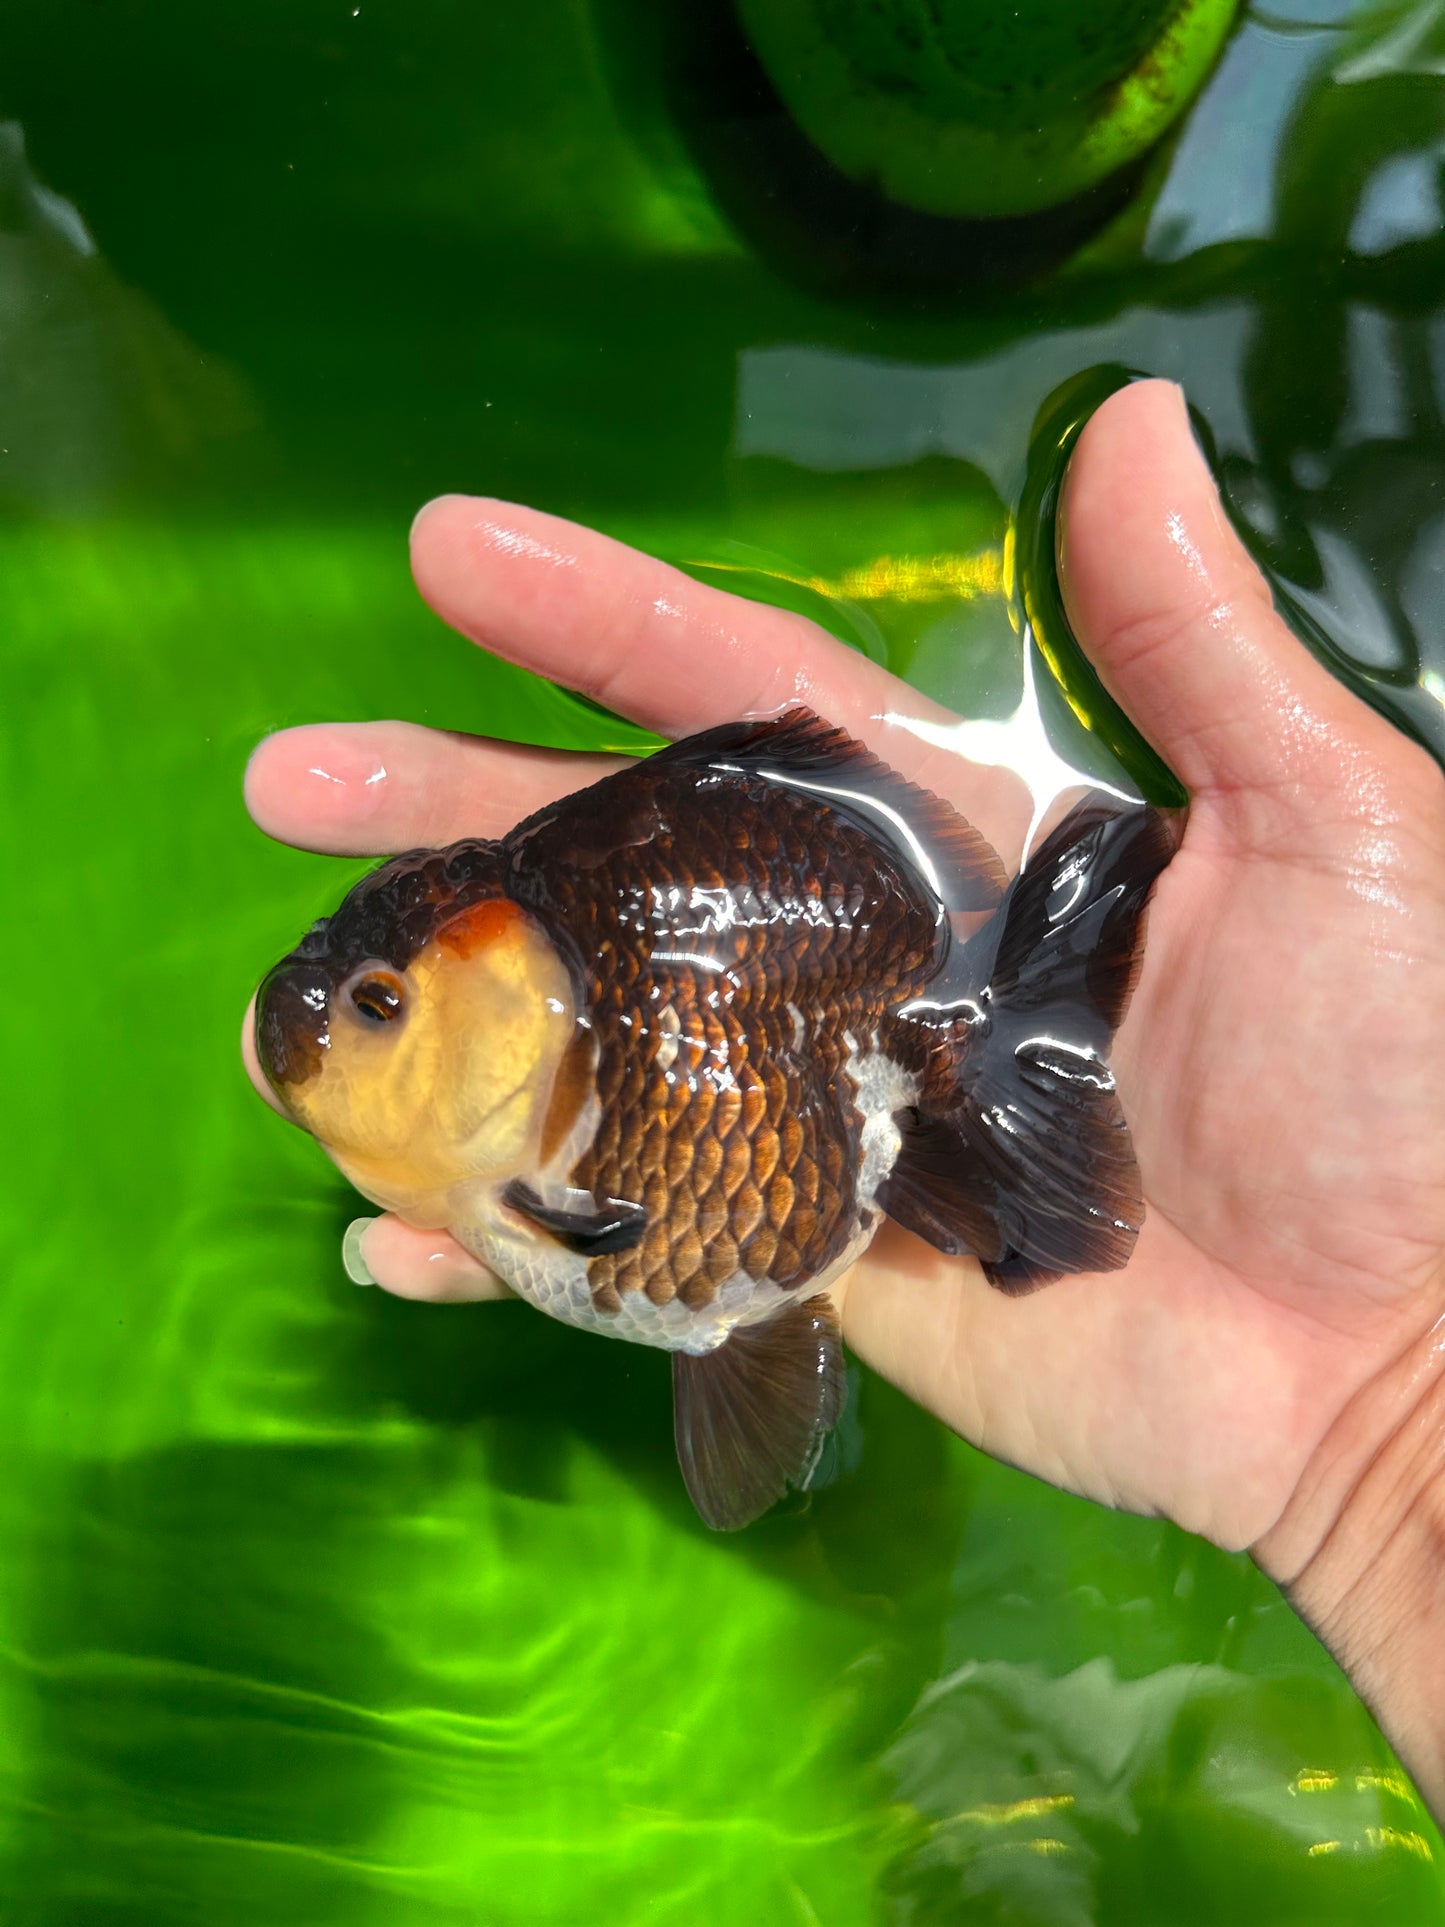 AAA Grade Tricolor Yuanbao Female 4.5 inches #0628YB_30